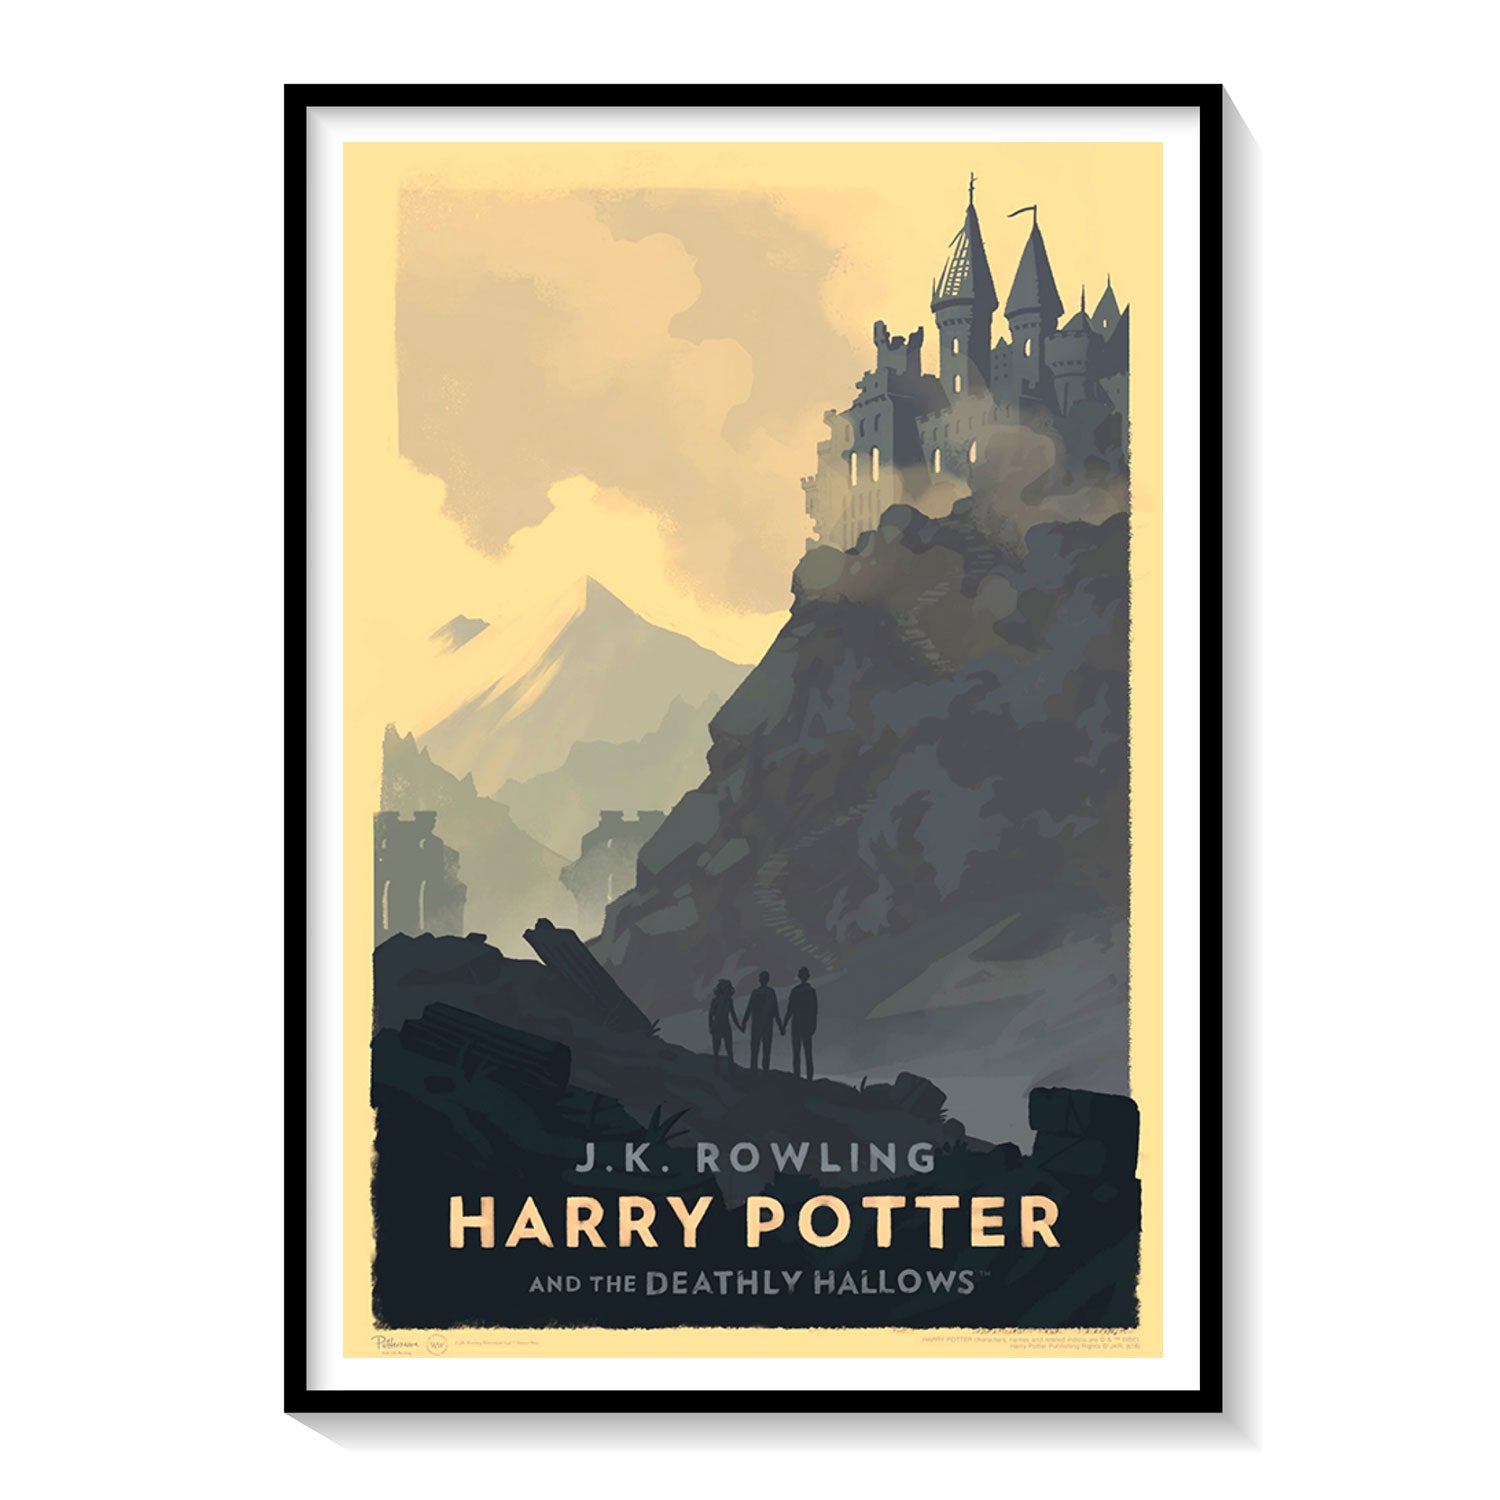 Harry Potter and the Deathly Hallows- P 1 (2010) Movie Poster: Buy